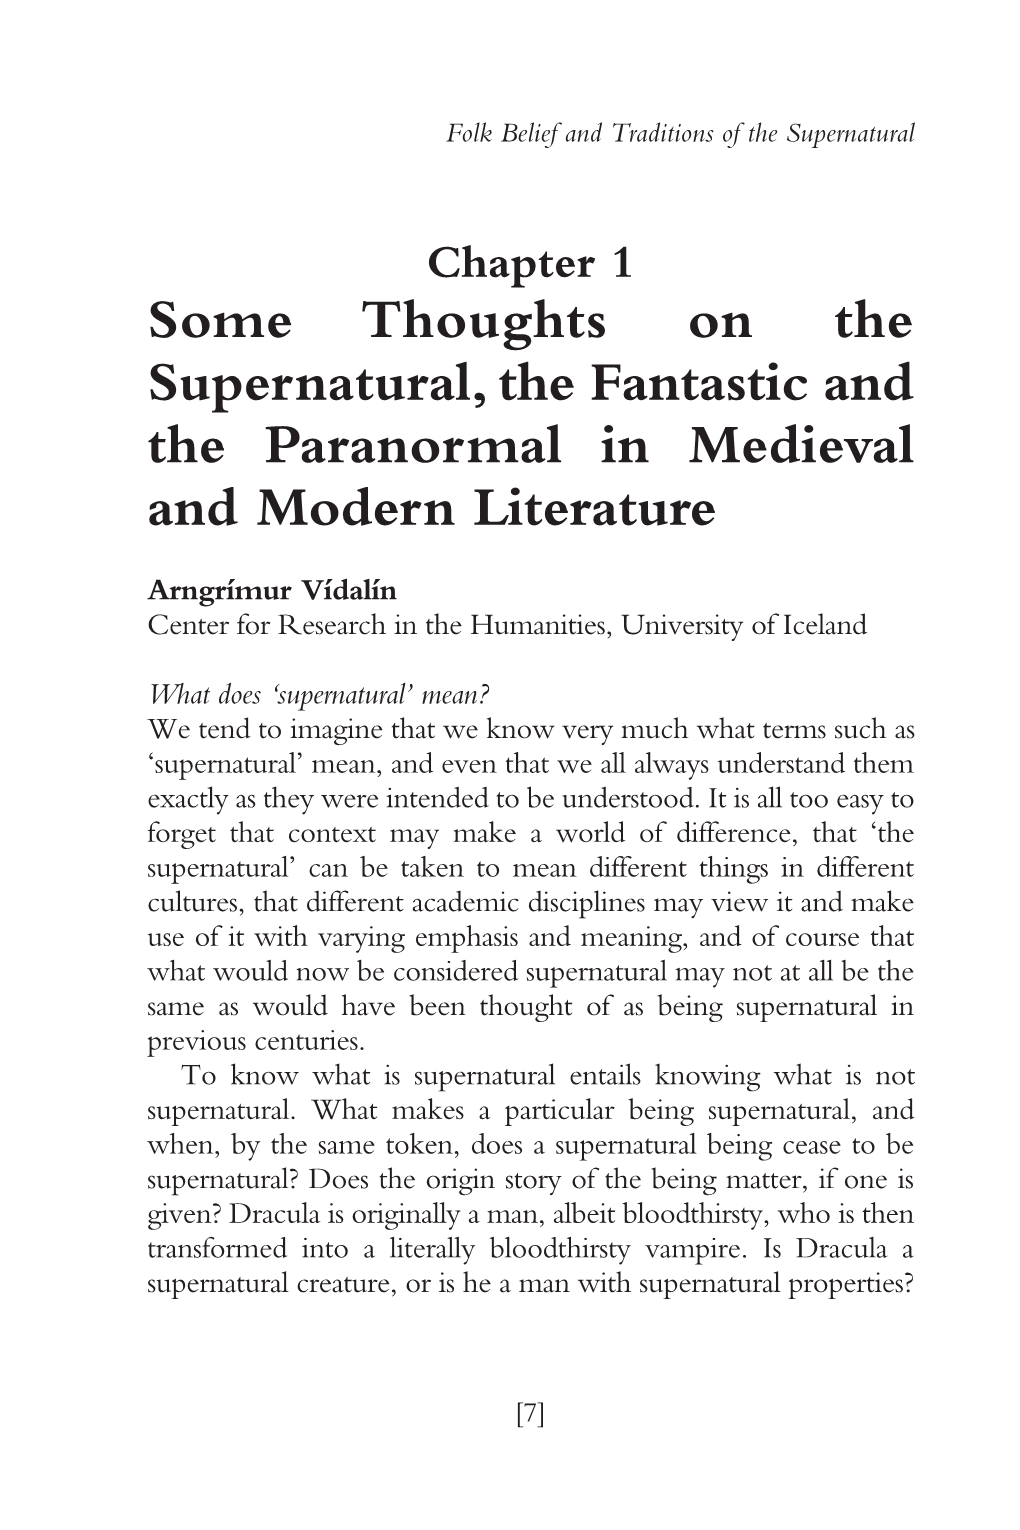 Some Thoughts on the Supernatural, the Fantastic and the Paranormal in Medieval and Modern Literature